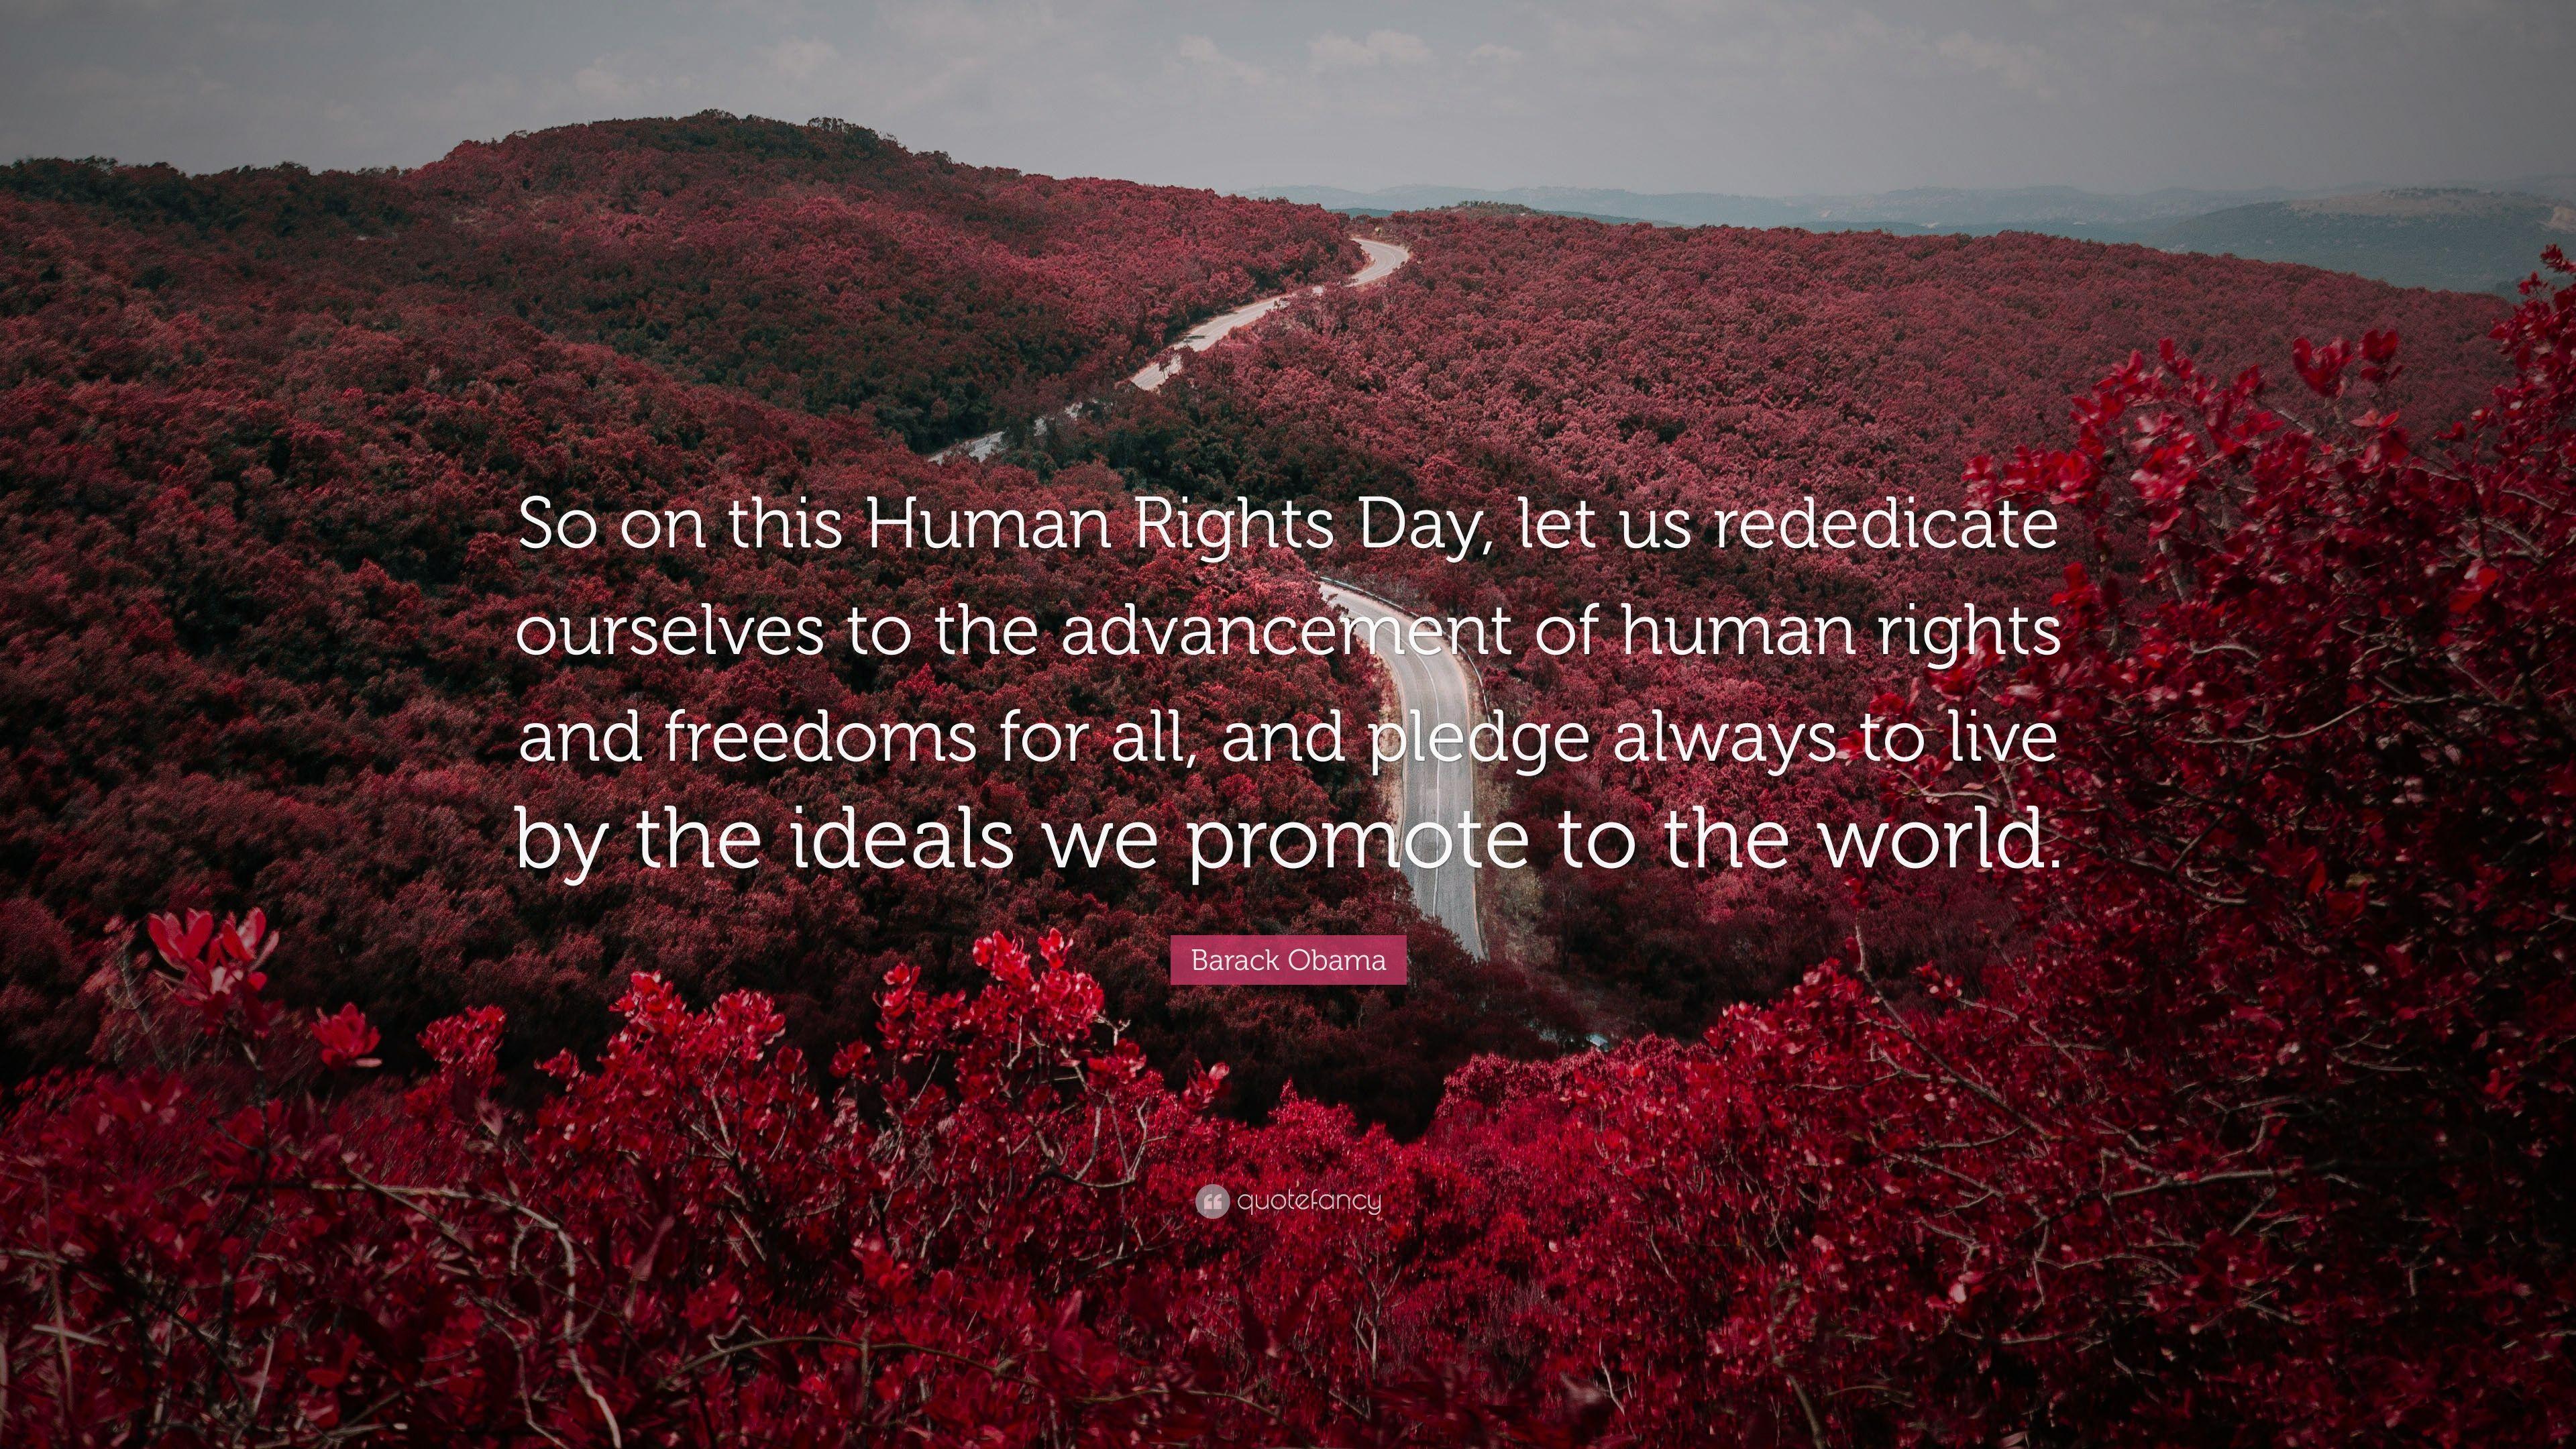 Barack Obama Quote: “So on this Human Rights Day, let us